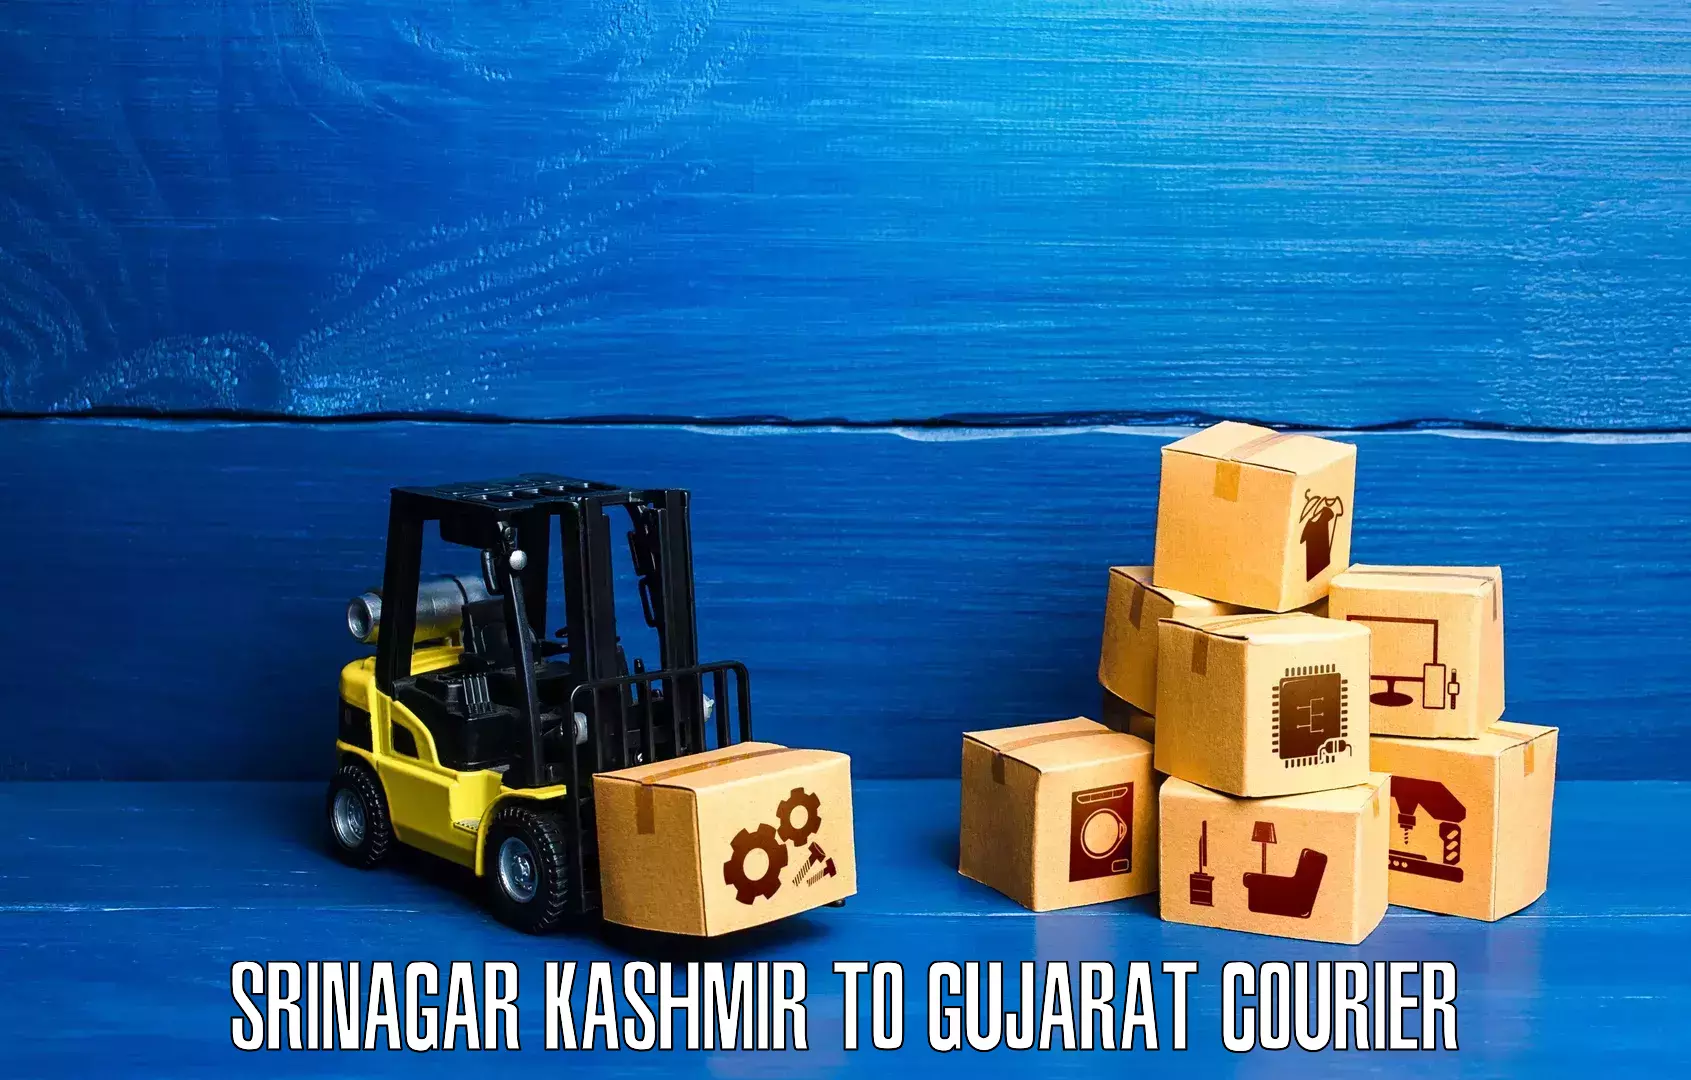 State-of-the-art courier technology Srinagar Kashmir to Dholka